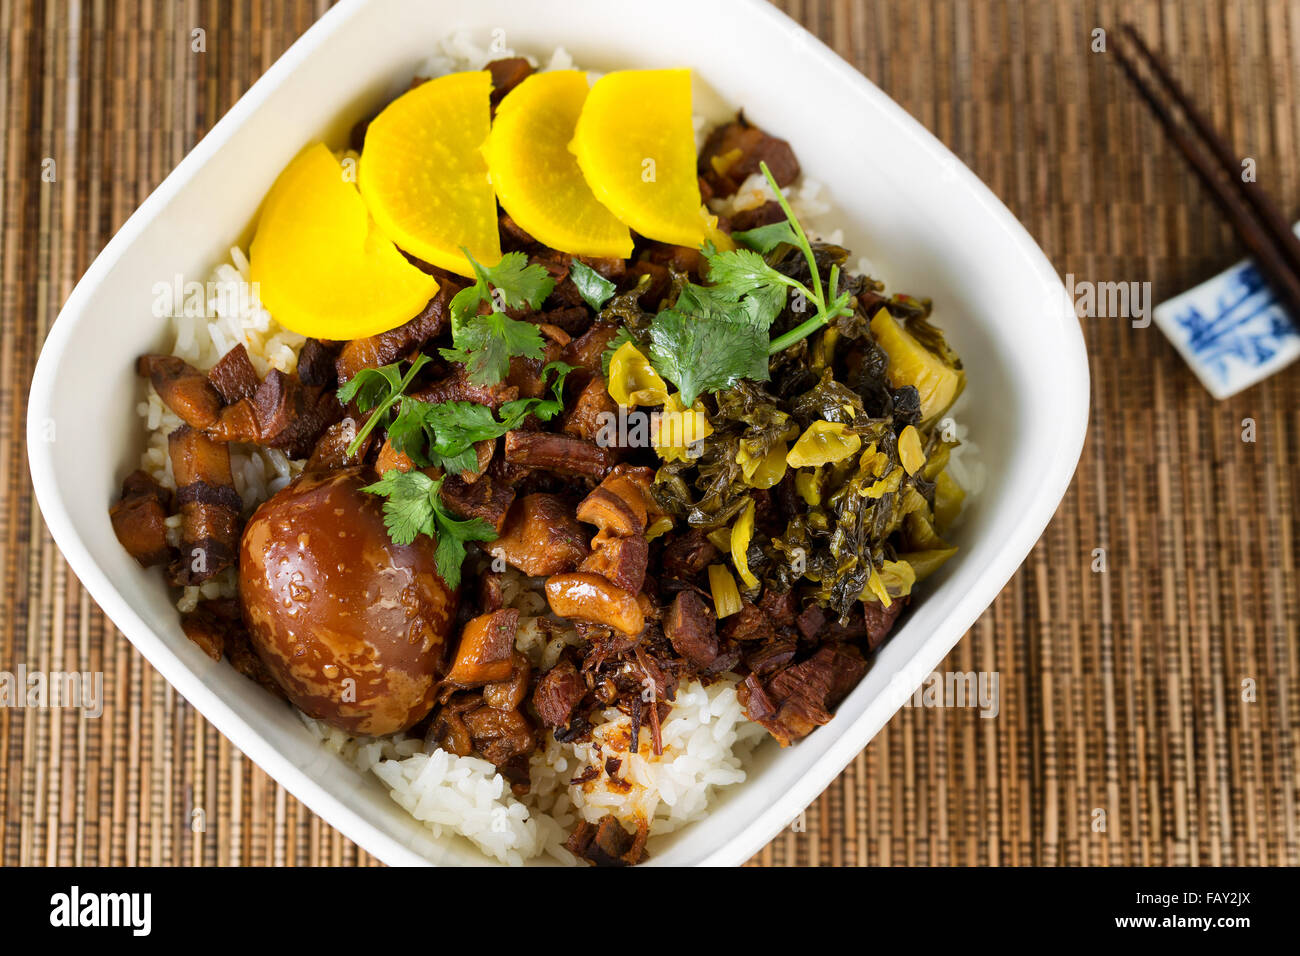 Top view of Asian dish with sliced pork, soy sauce egg, pickles, rice and chopsticks. Stock Photo